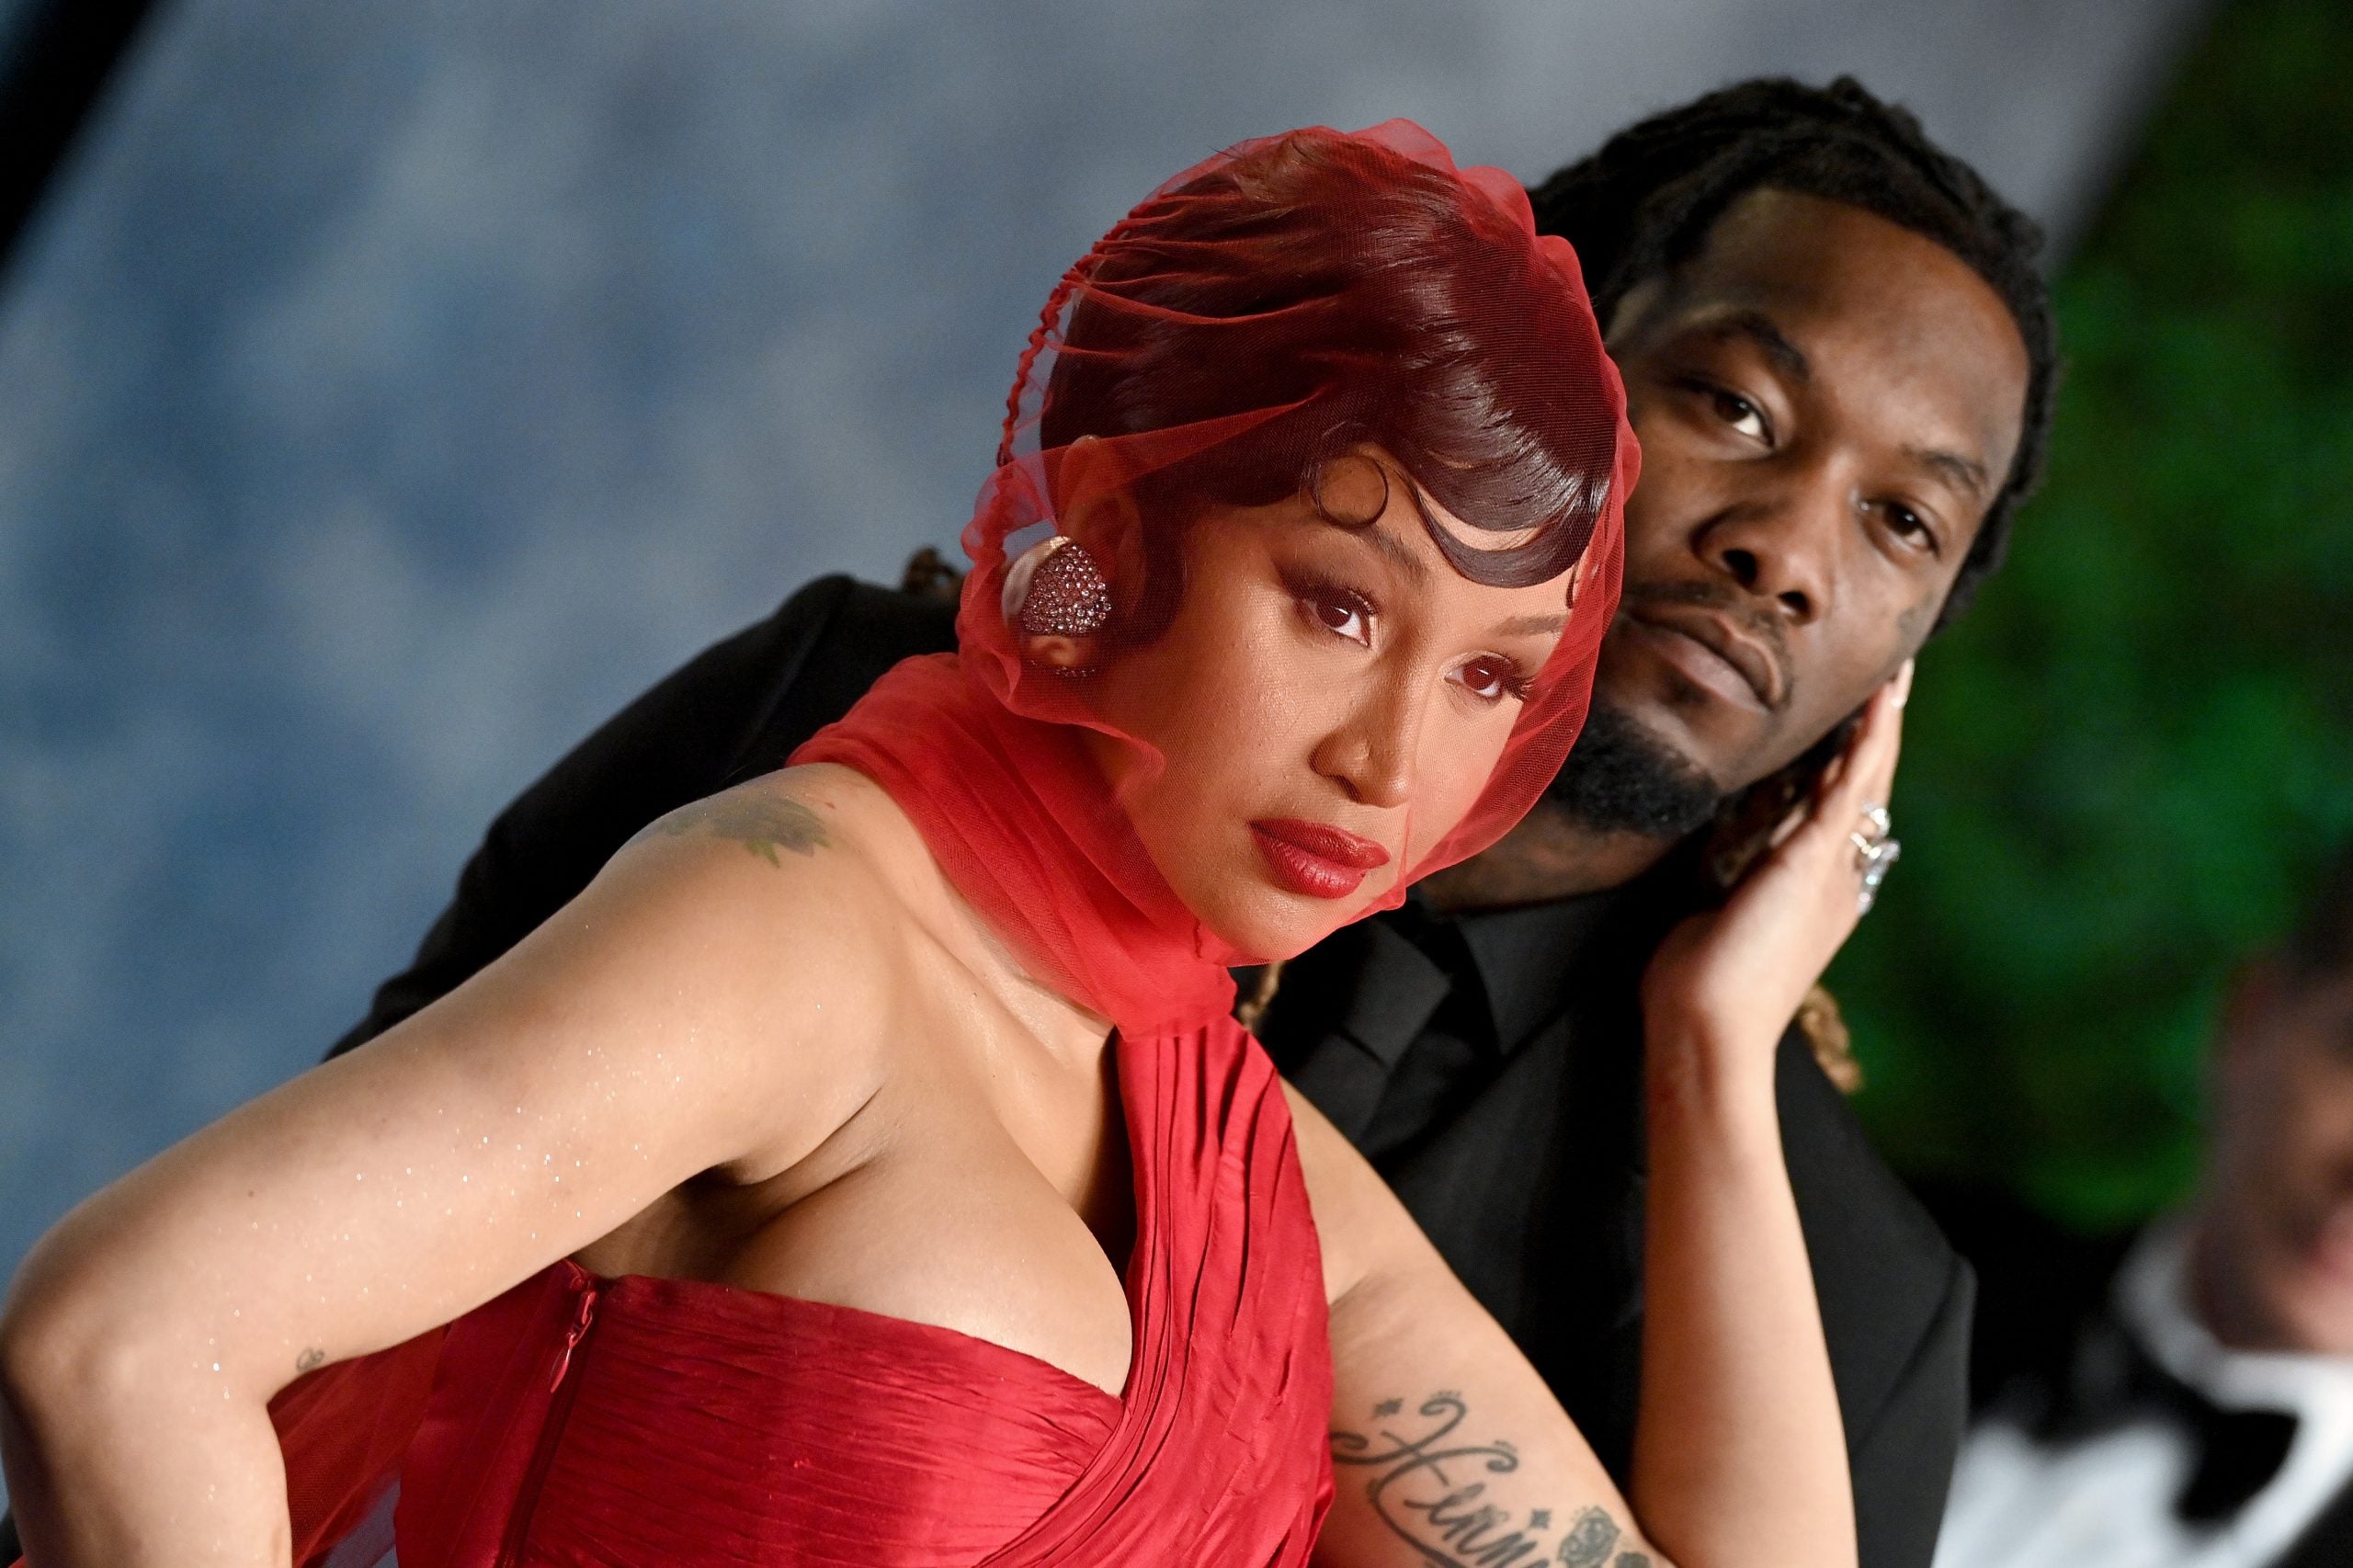 Cardi B Says She And Offset Have Called It Quits: 'I've Been Single For A Minute Now’